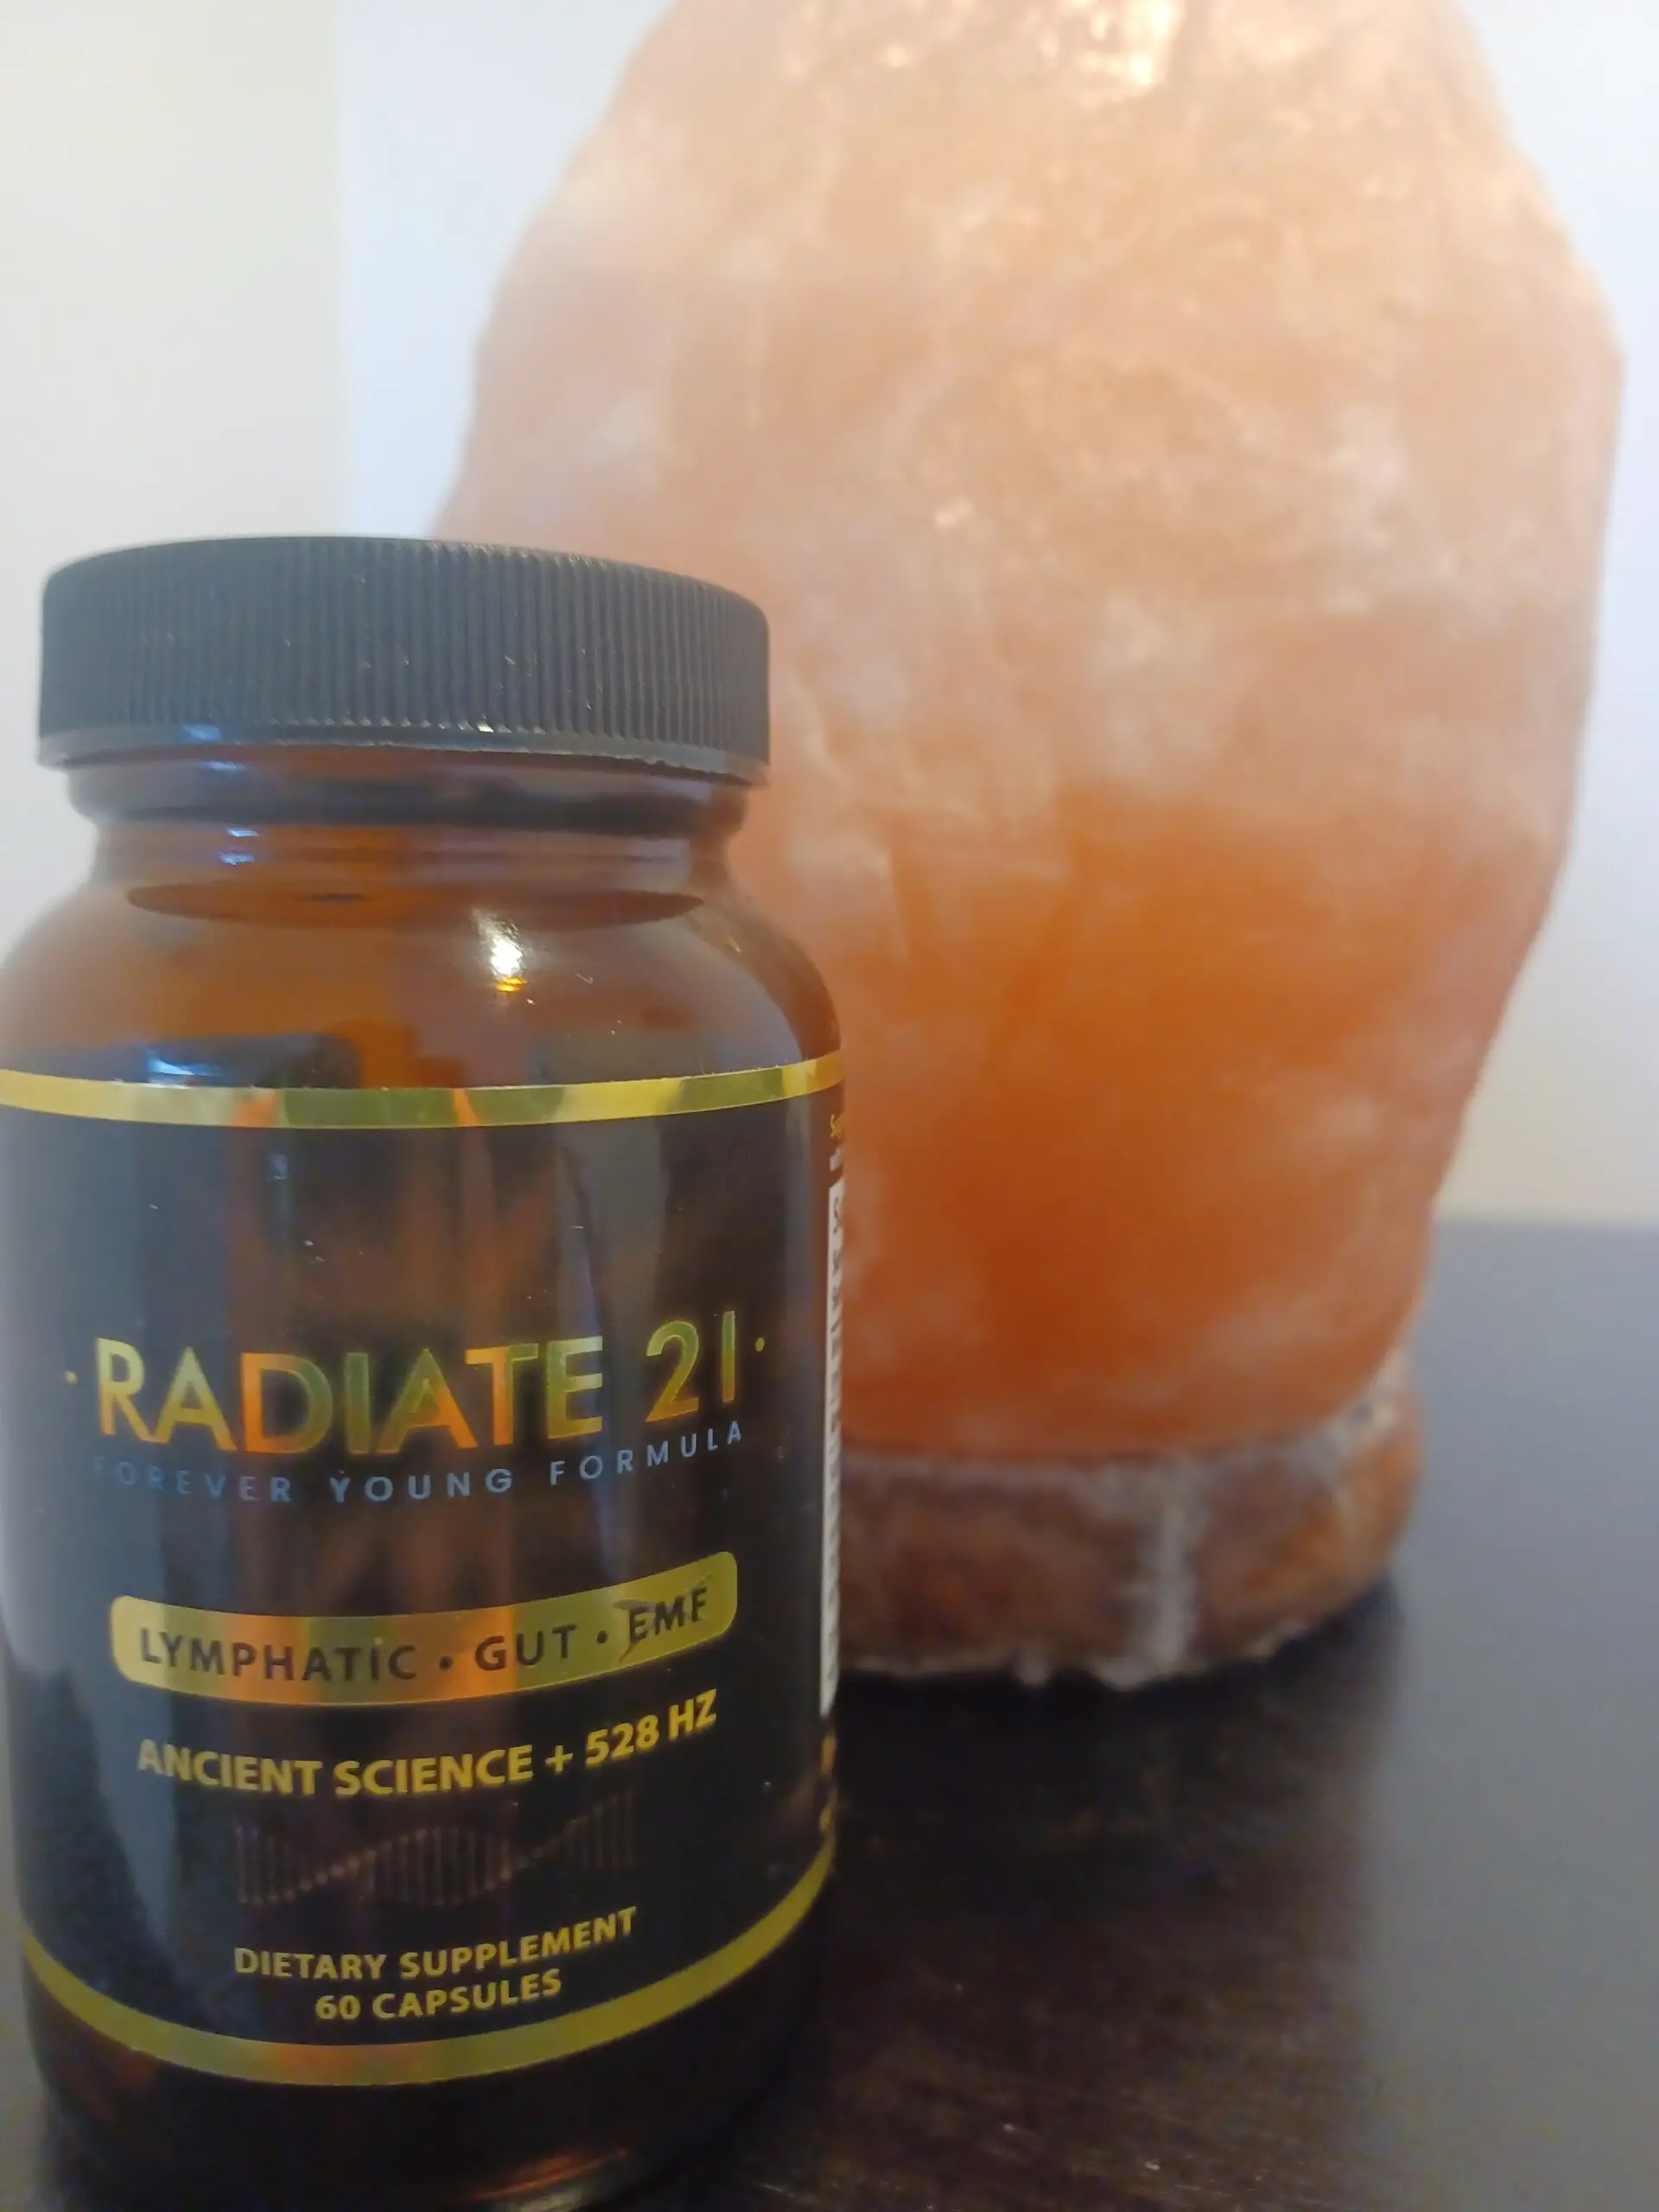 Radiate 21 offers 21 botanical herbs from around the world for best health results. 